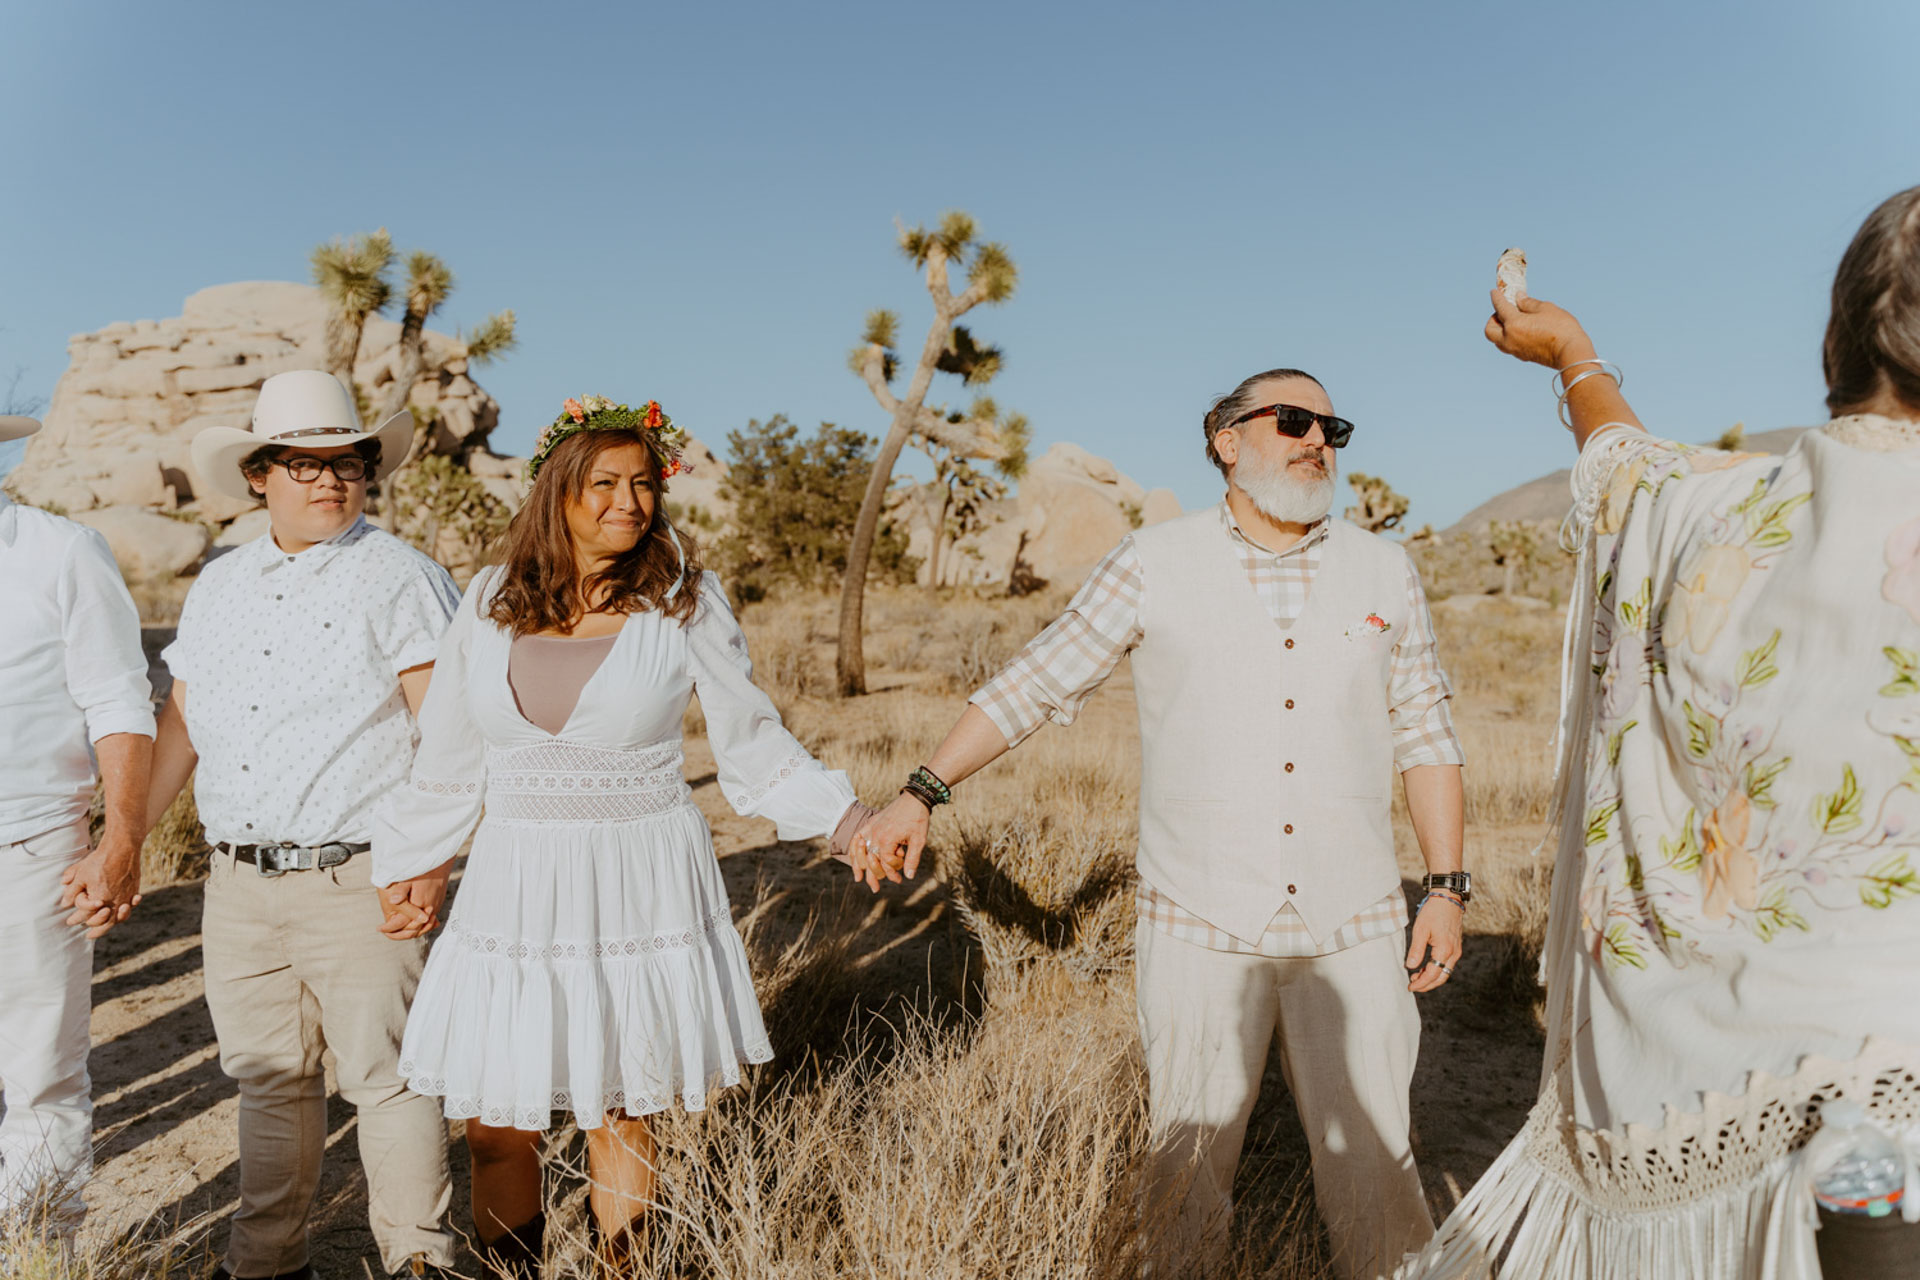 Parents of the bride at the ceremony, holding hands — Joshua Tree Wedding Photographer